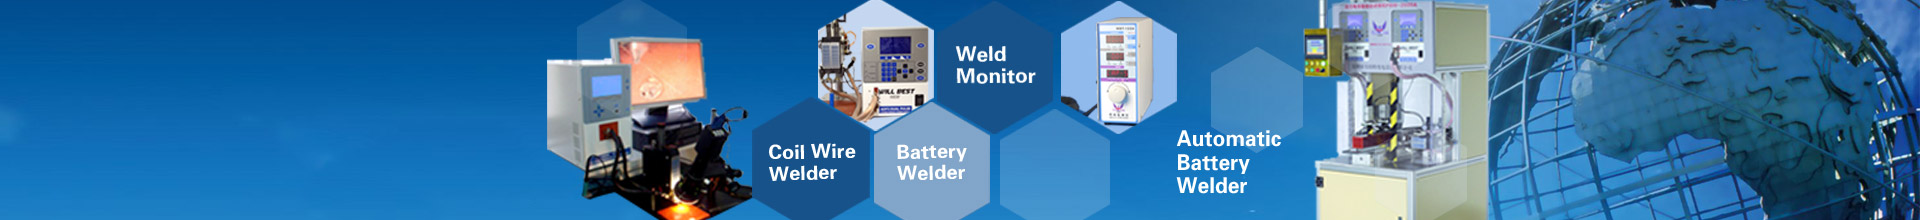 Weld Quality Control System